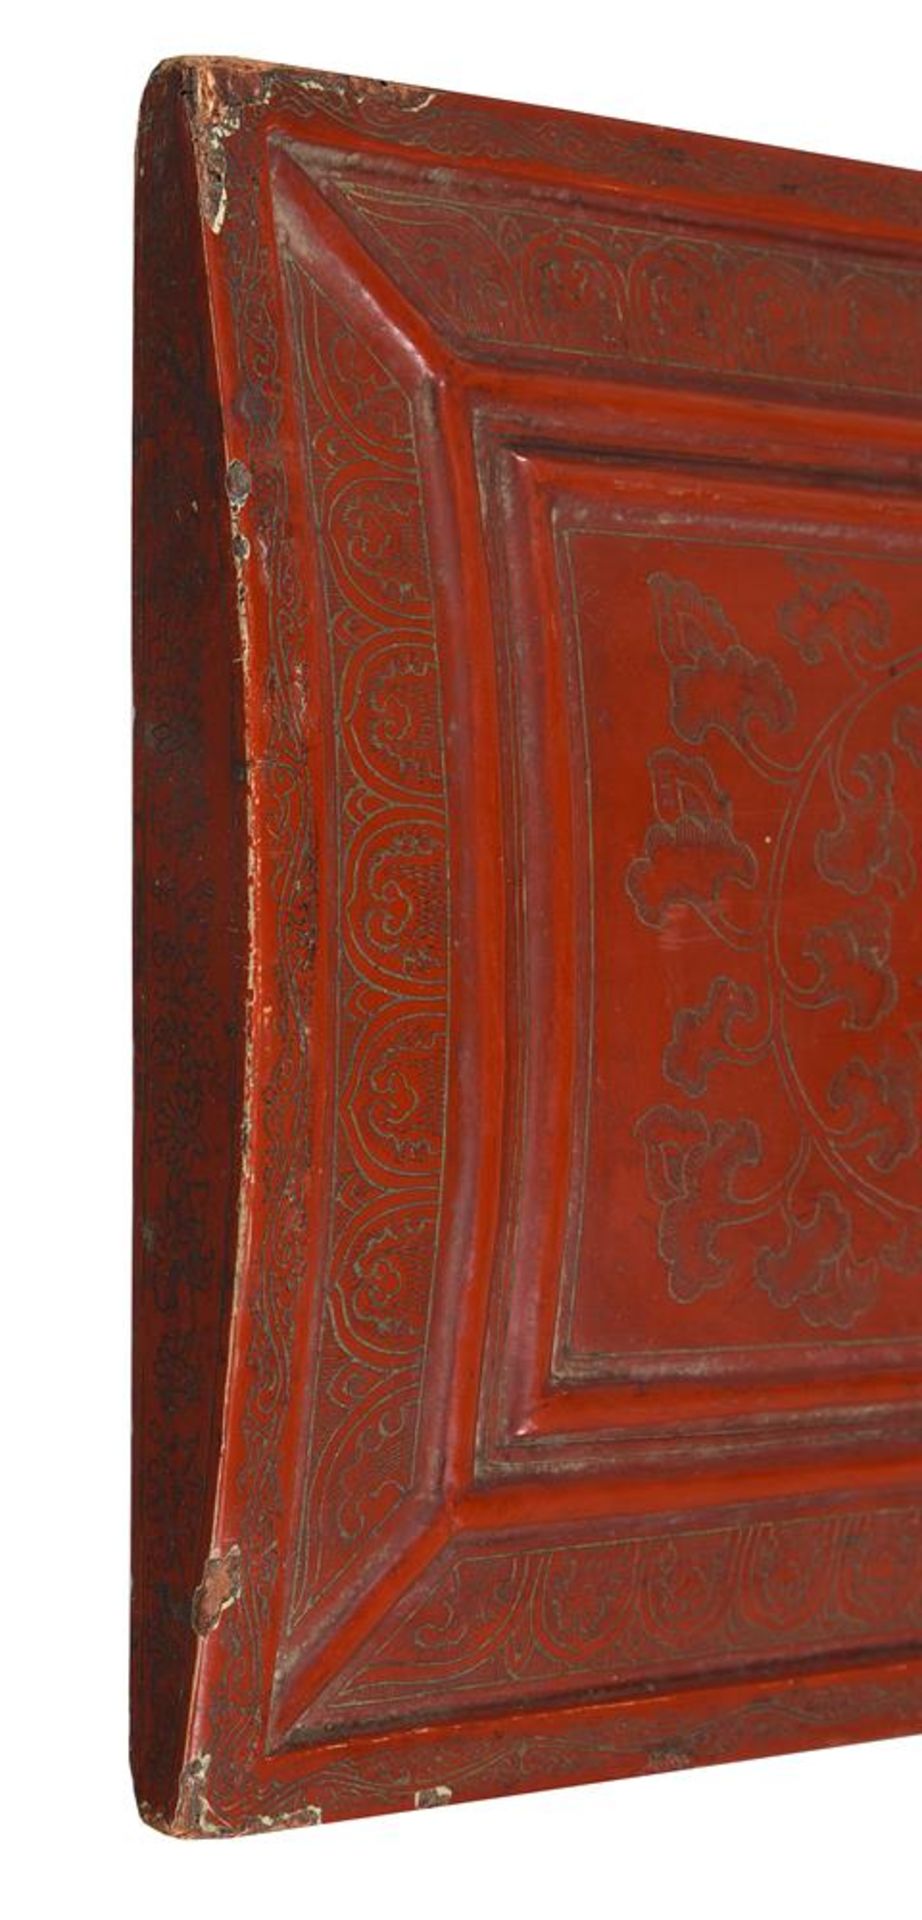 A Tibetan incised red lacquer wood book cover - Image 3 of 3